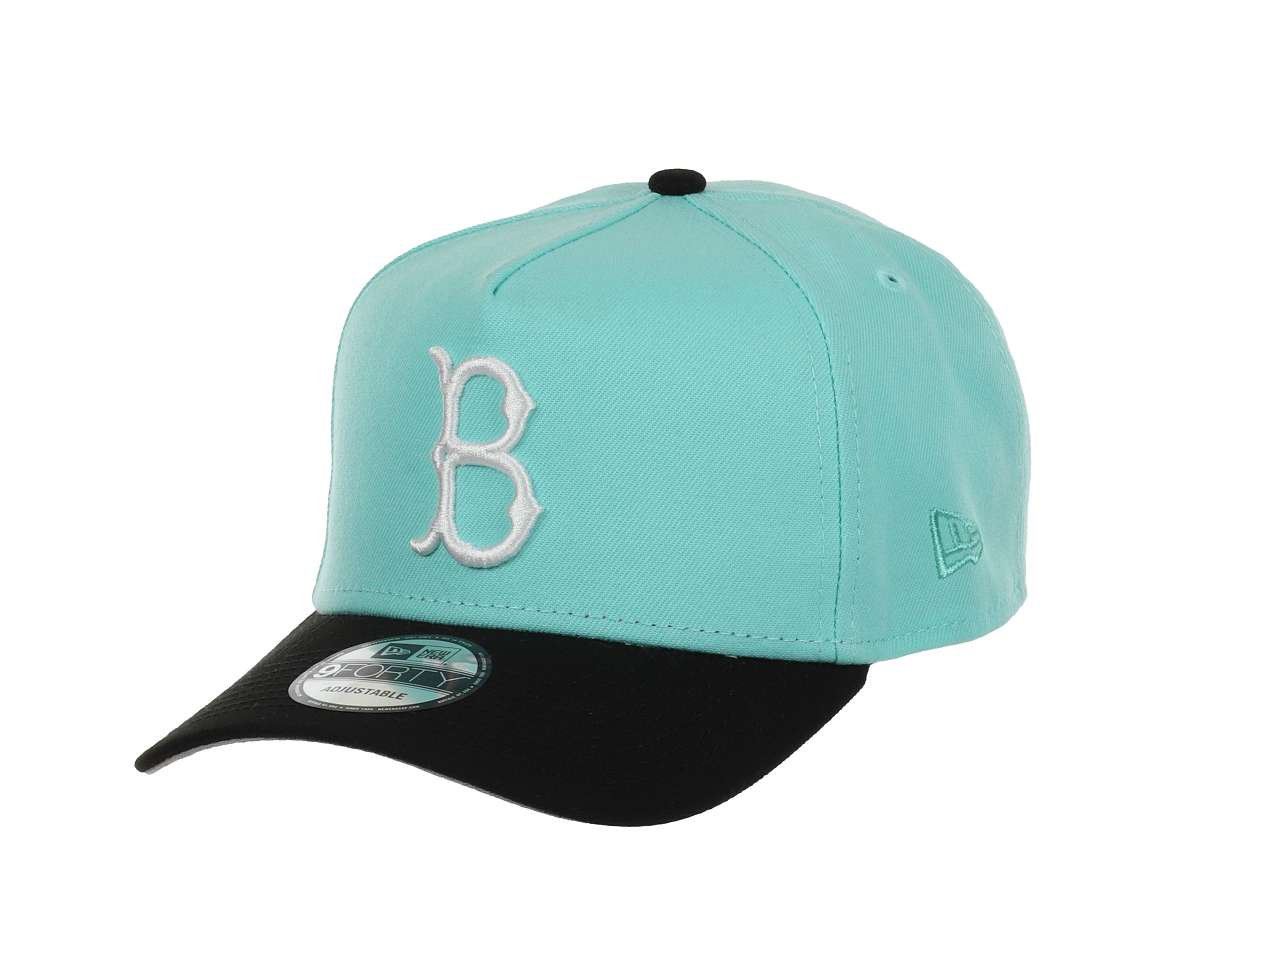 Brooklyn Dodgers MLB 1st World Championship 1955 Sidepatch Cooperstown Mint Black 9Forty A-Frame Snapback Cap New Era